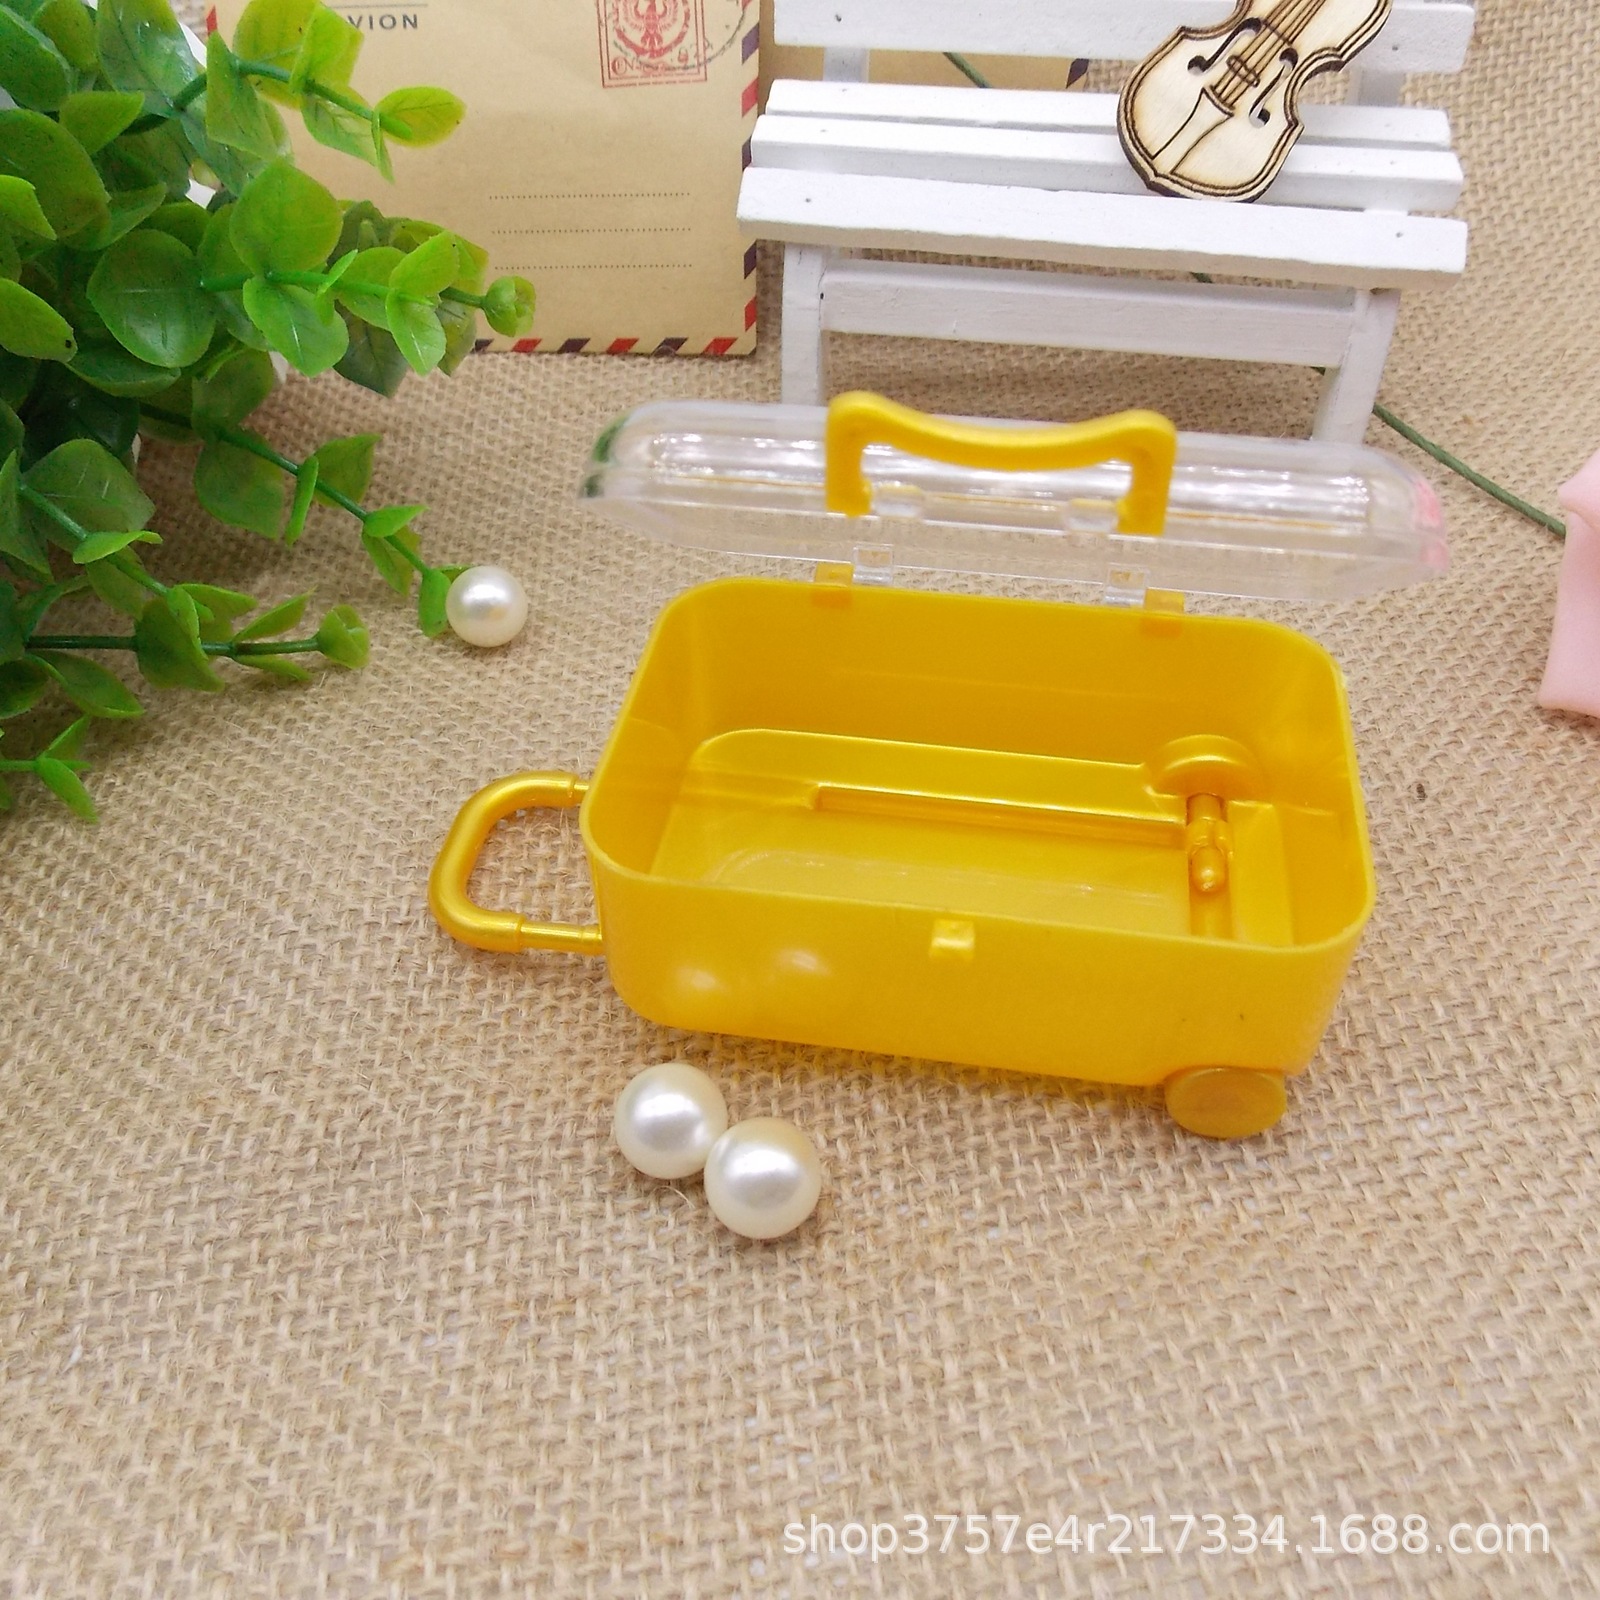 Foreign Trade E-Commerce Cross-Border Supply Yiwu Factory Direct Sales Personalized Creative Wedding Candies Box Trolley Case Luggage Suitcase